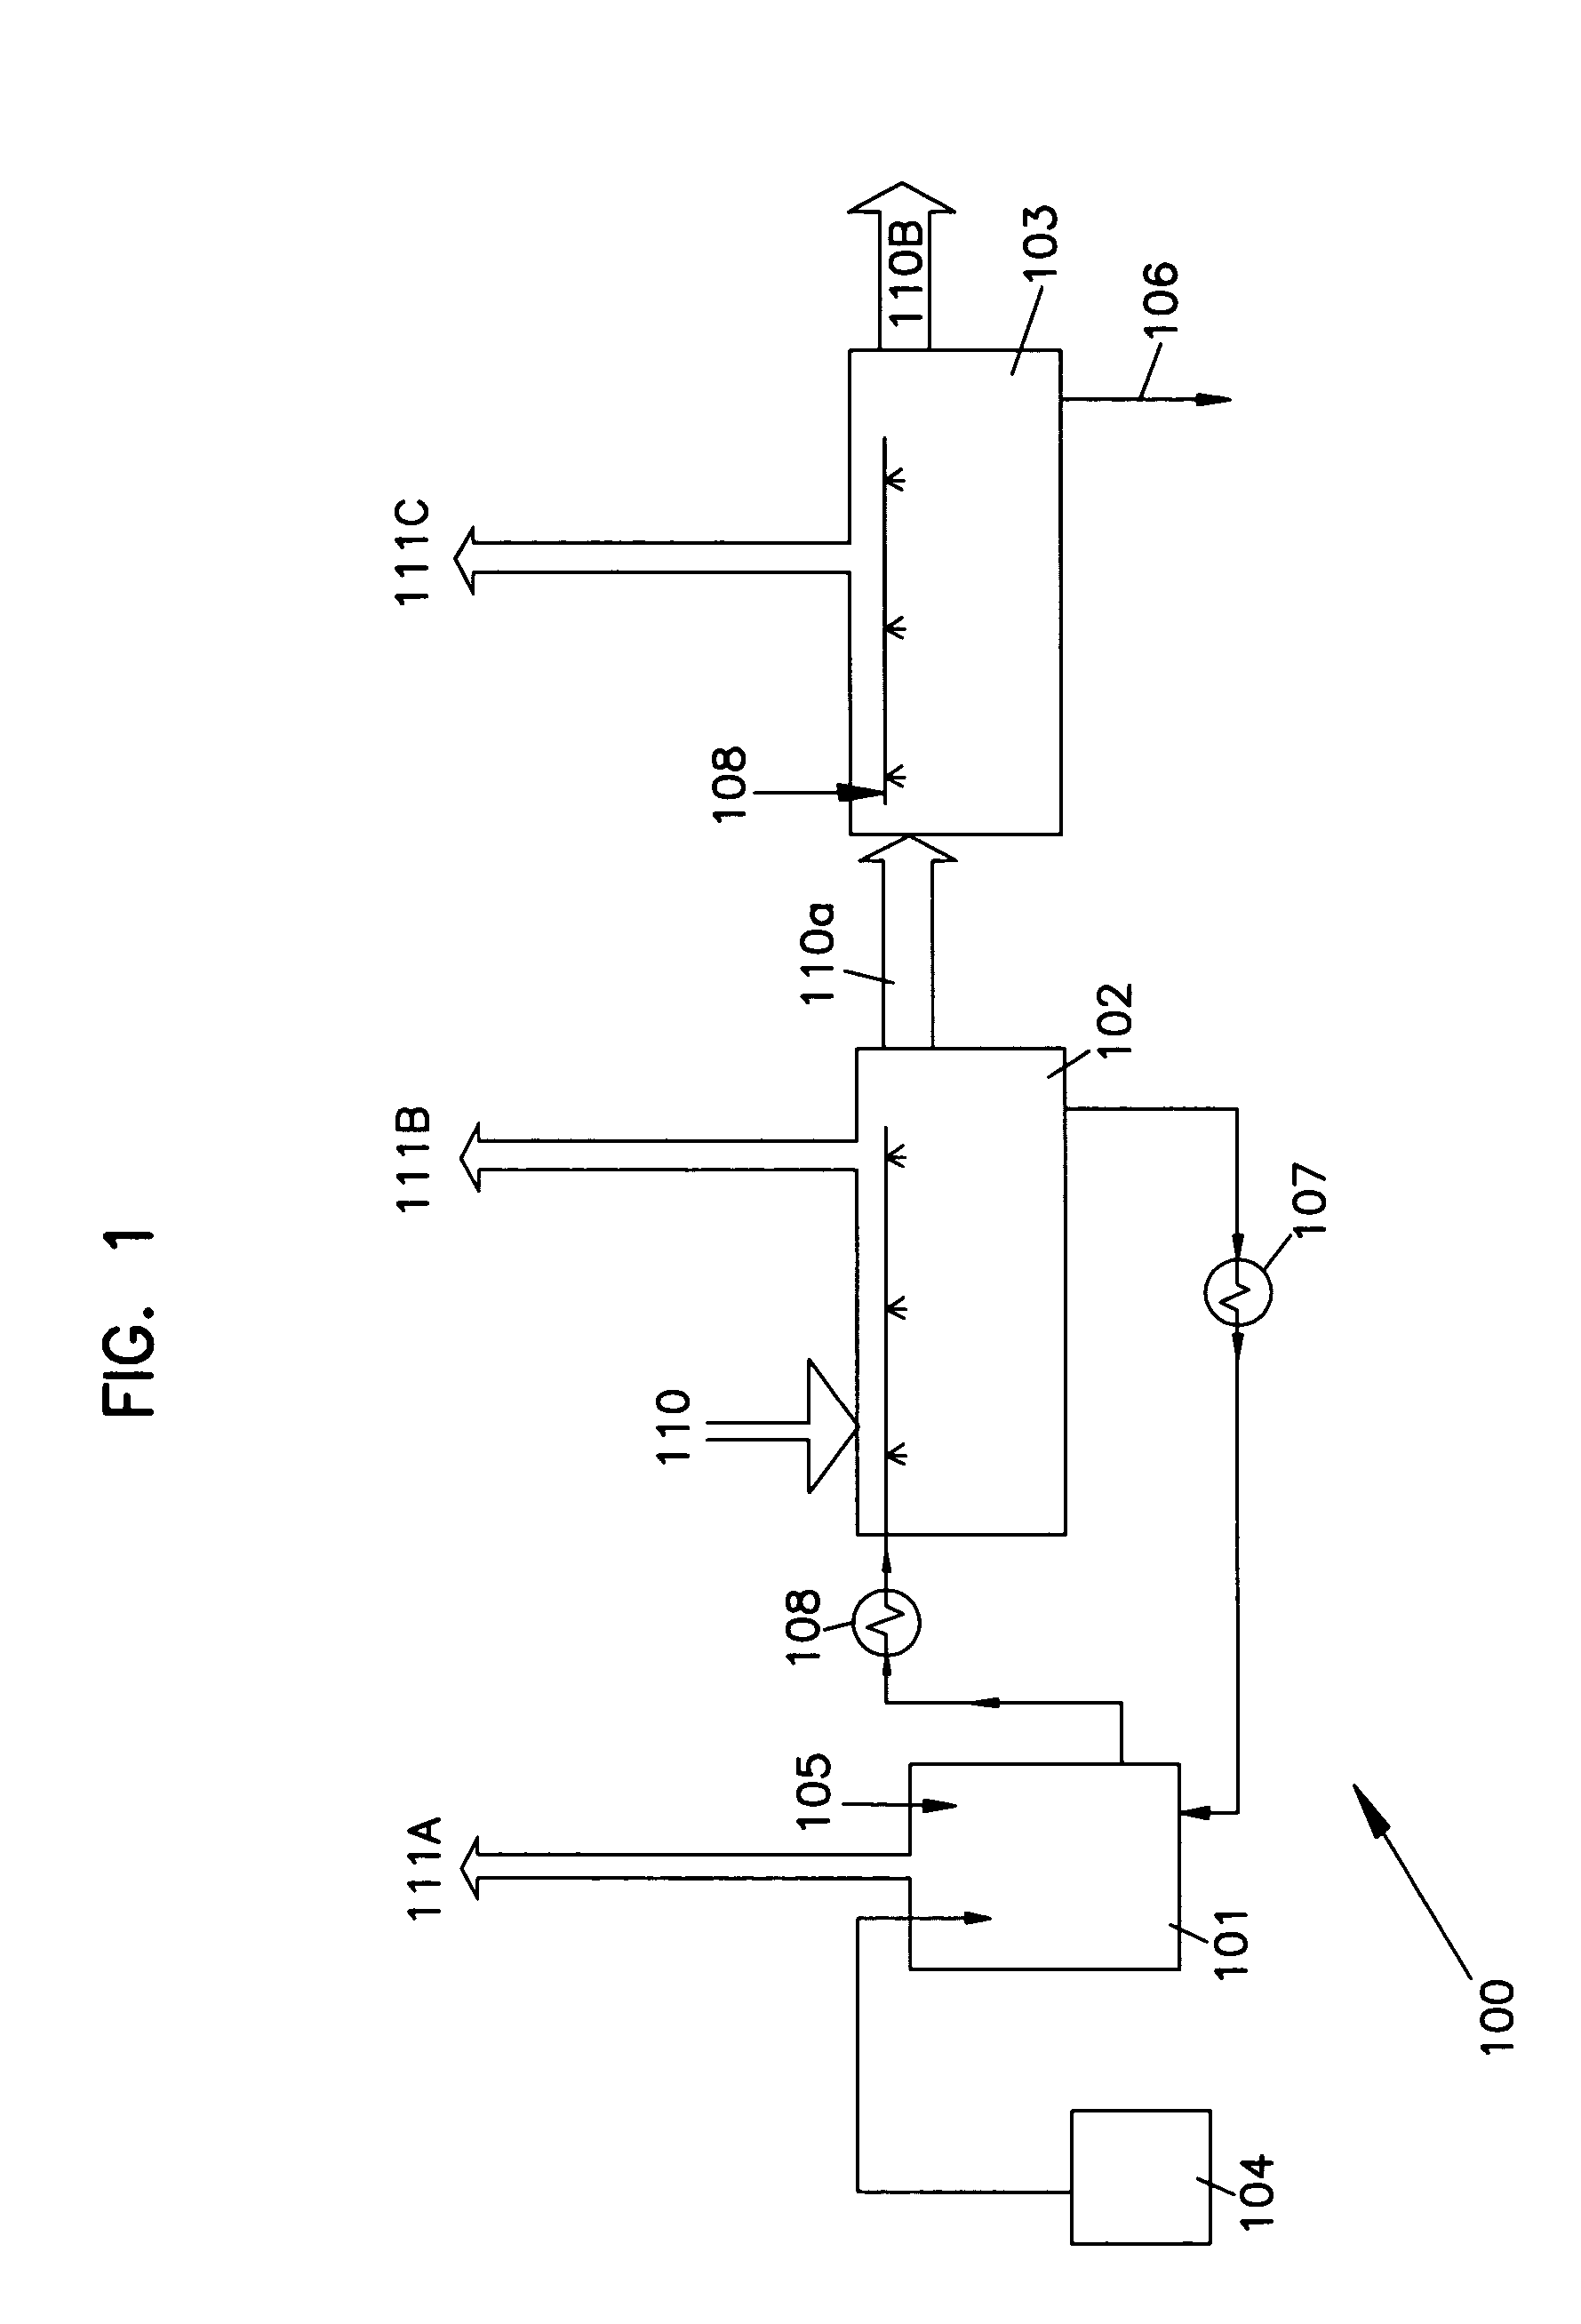 Two solvent antimicrobial compositions and methods employing them